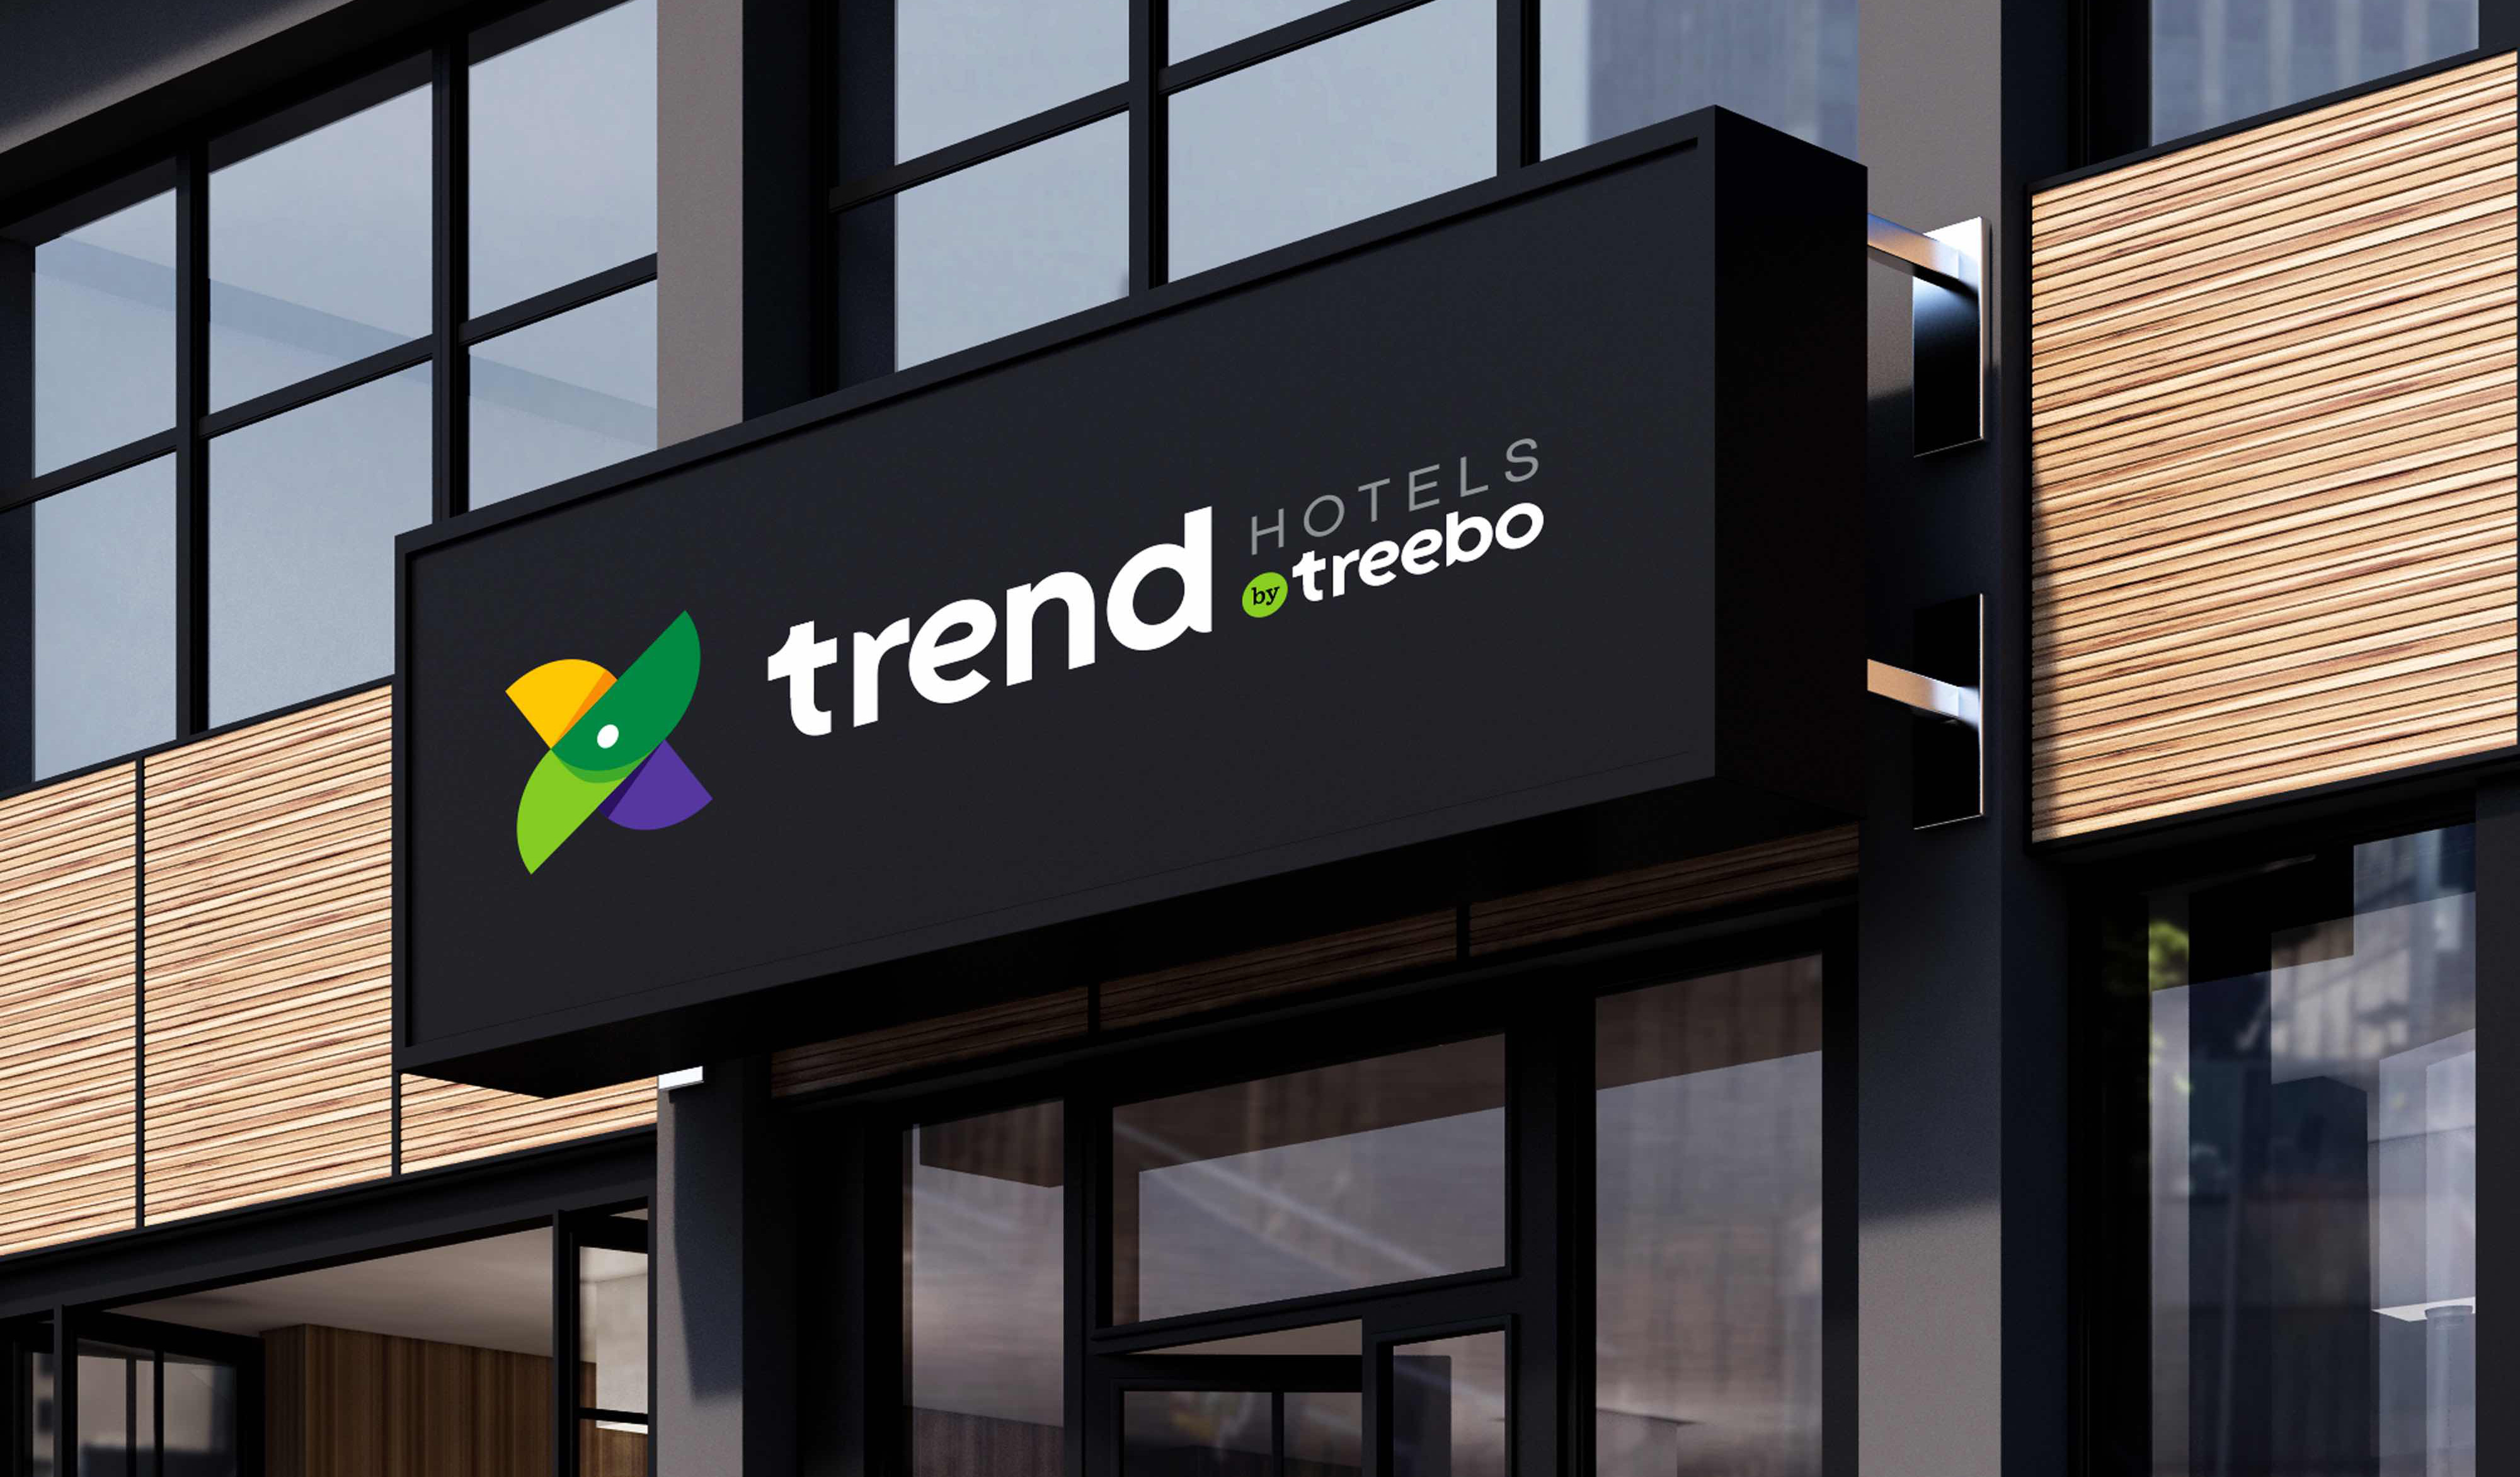 The Story Behind Our New Branding - Treebo Blog